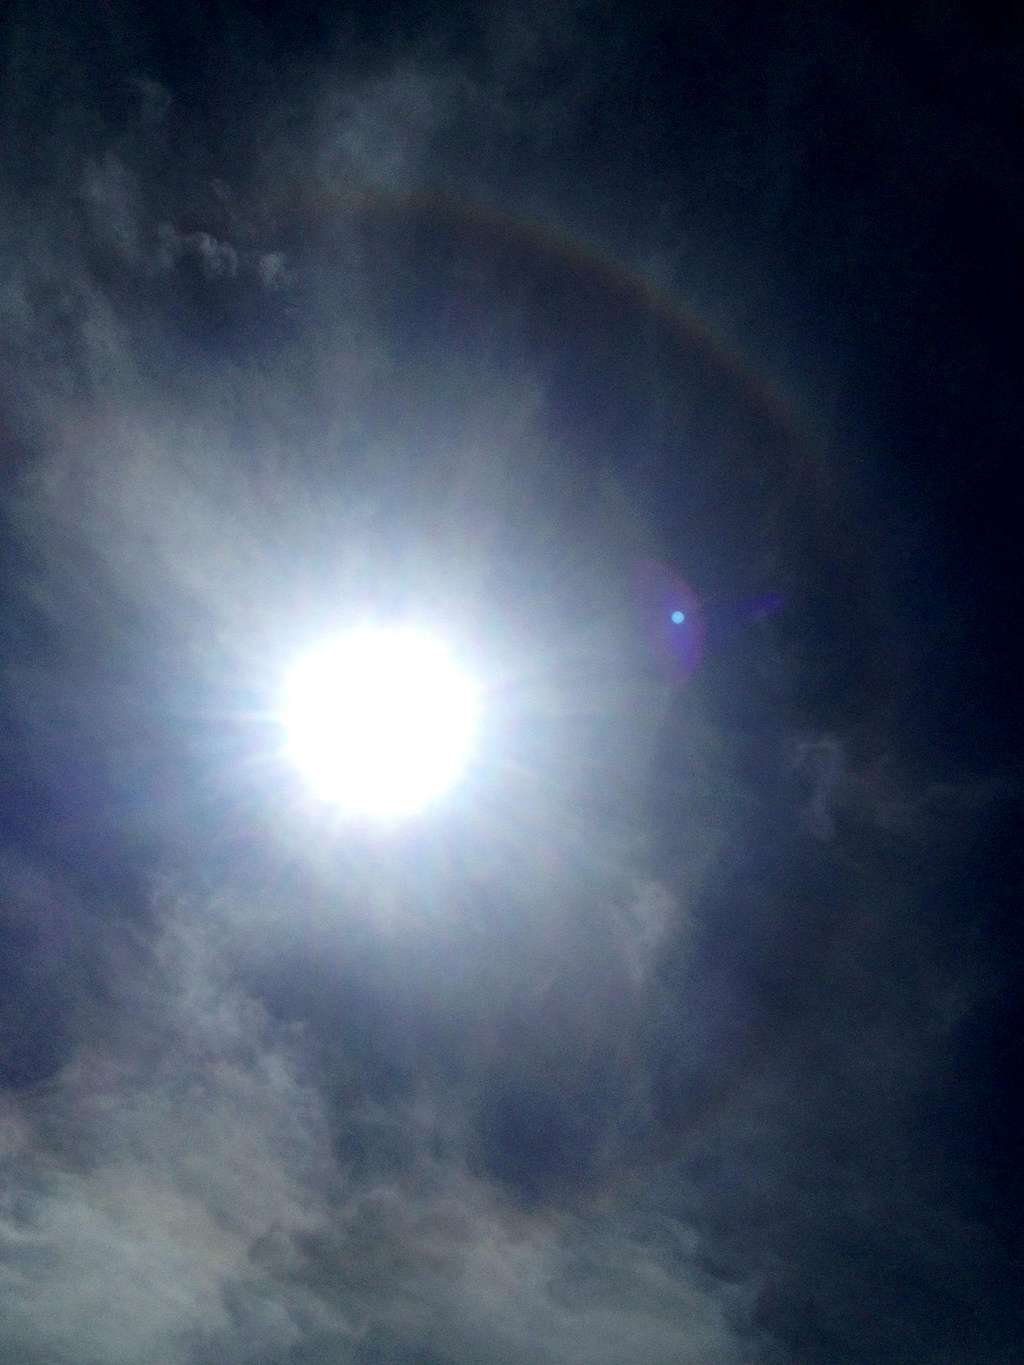 22 degree halo above the first gulley